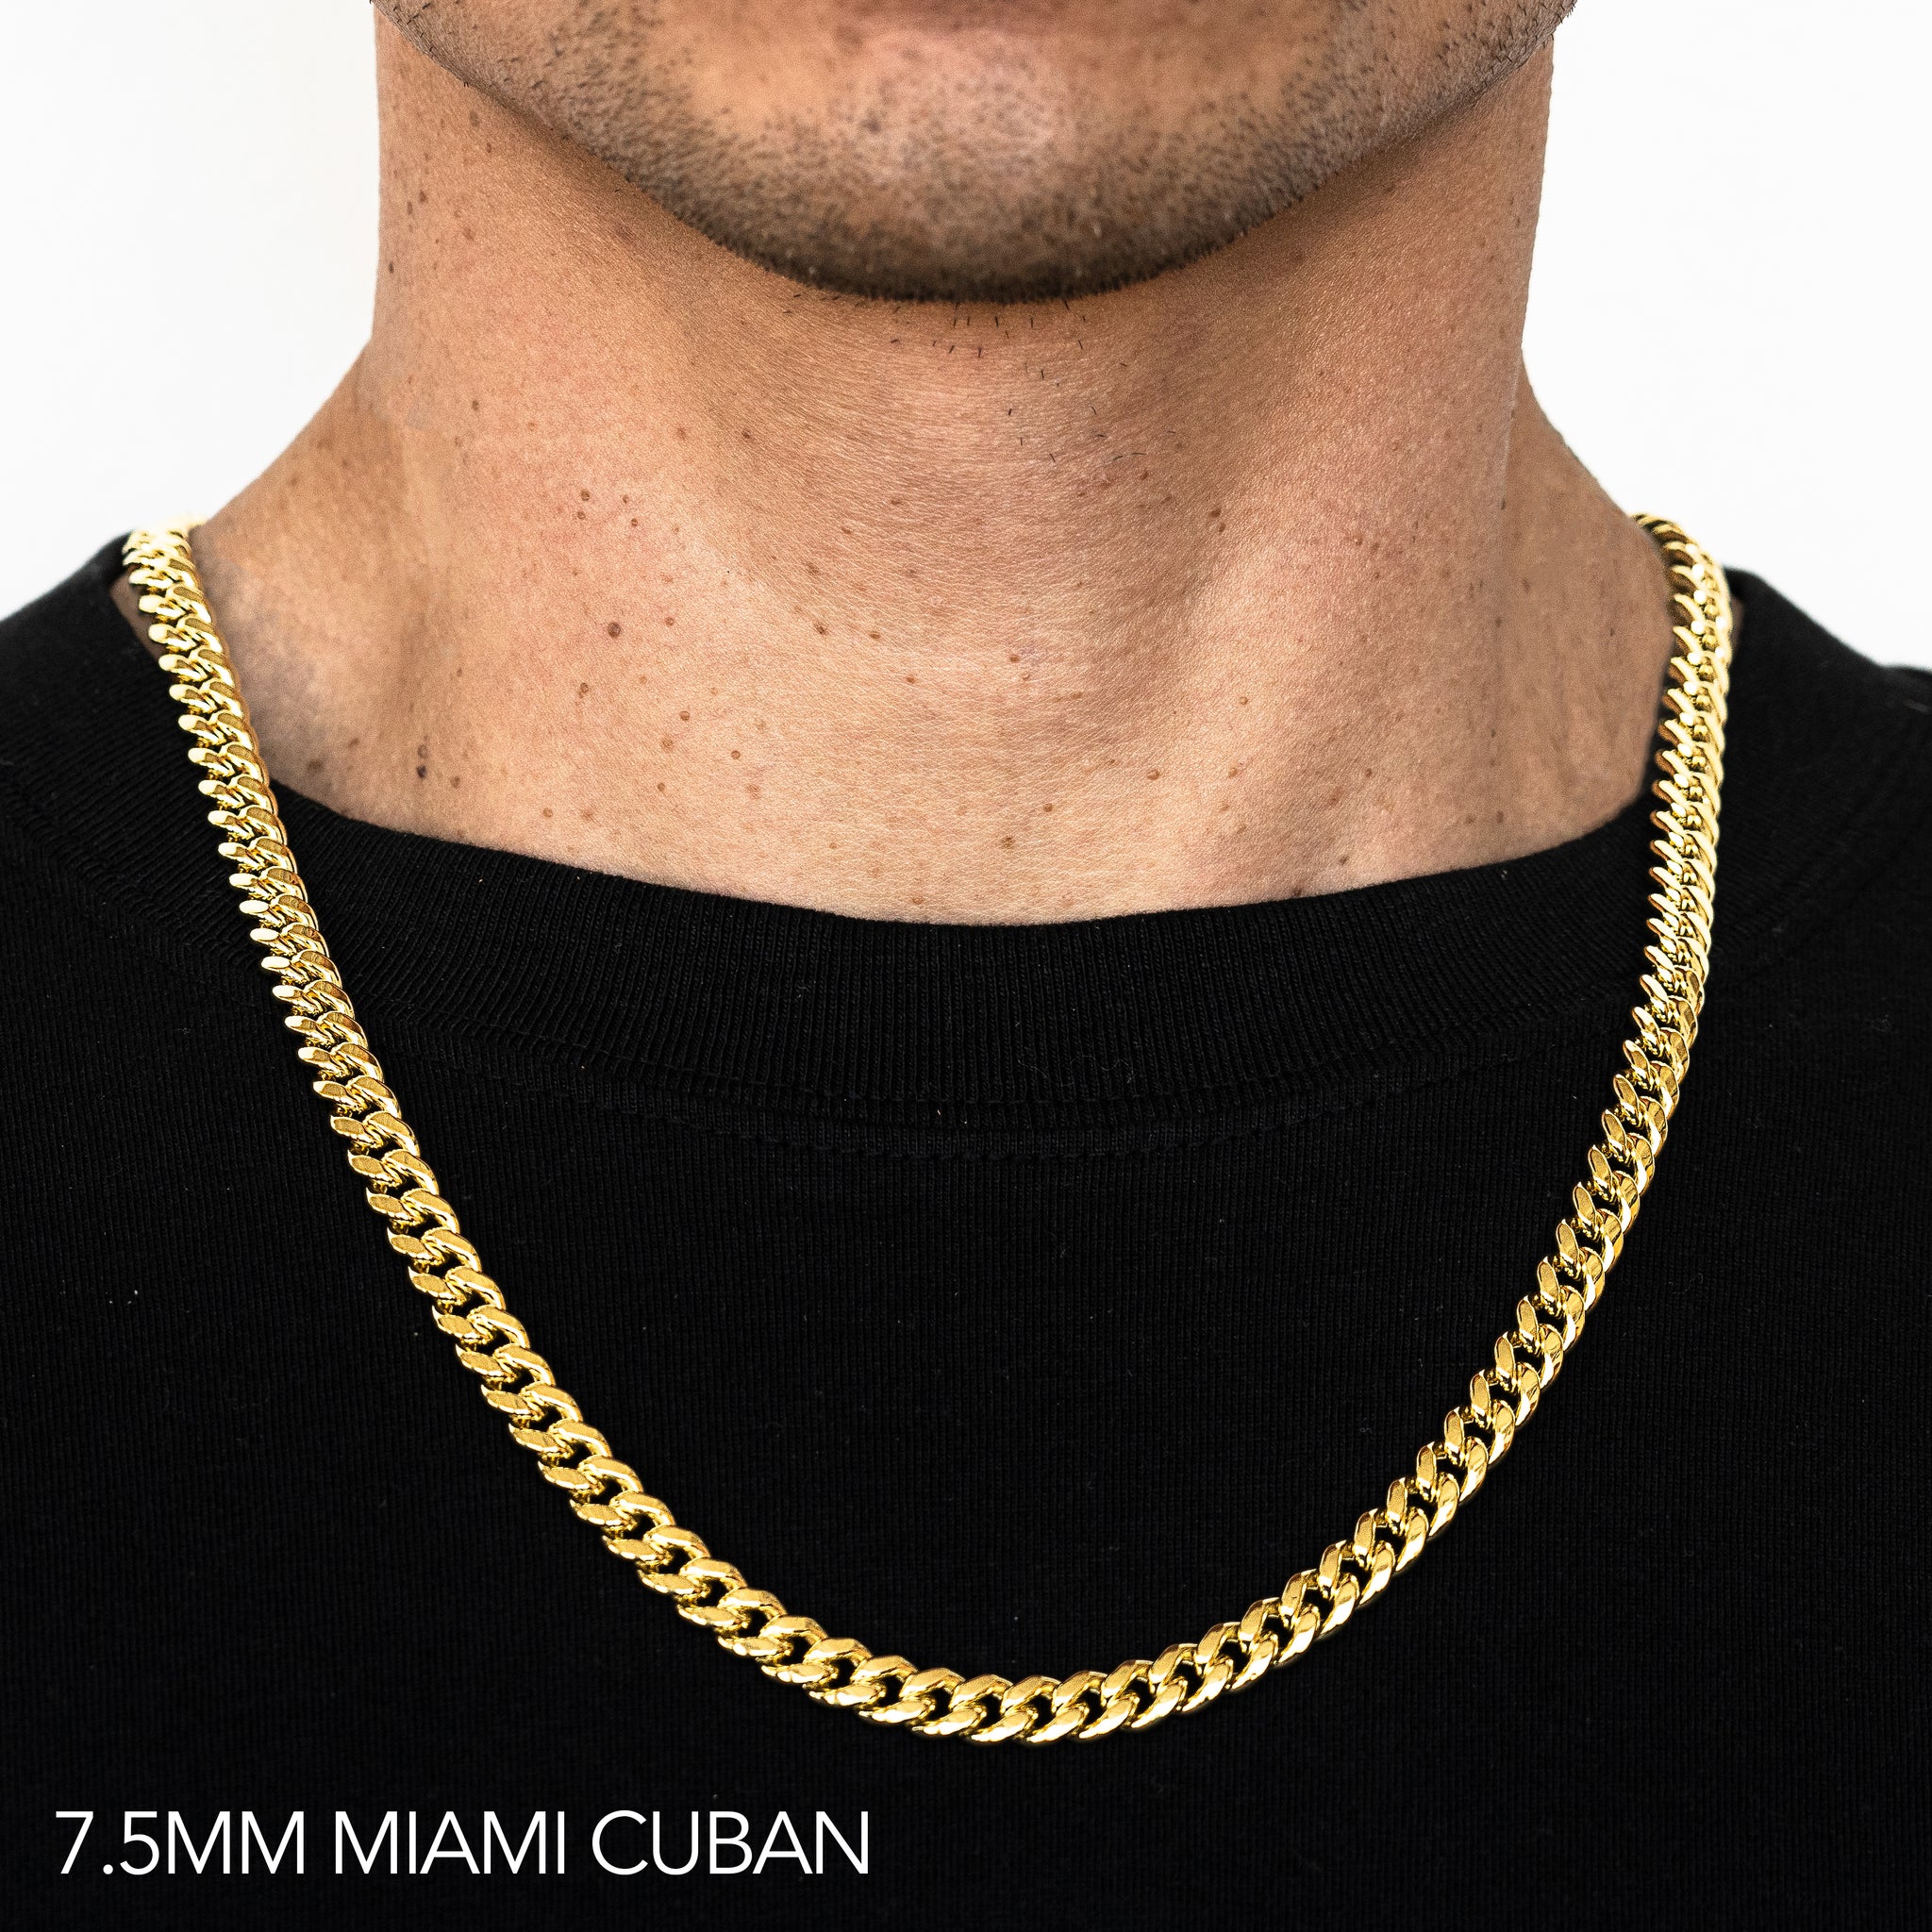 14K 7.5MM YELLOW GOLD HOLLOW MIAMI CUBAN 26 CHAIN NECKLACE"